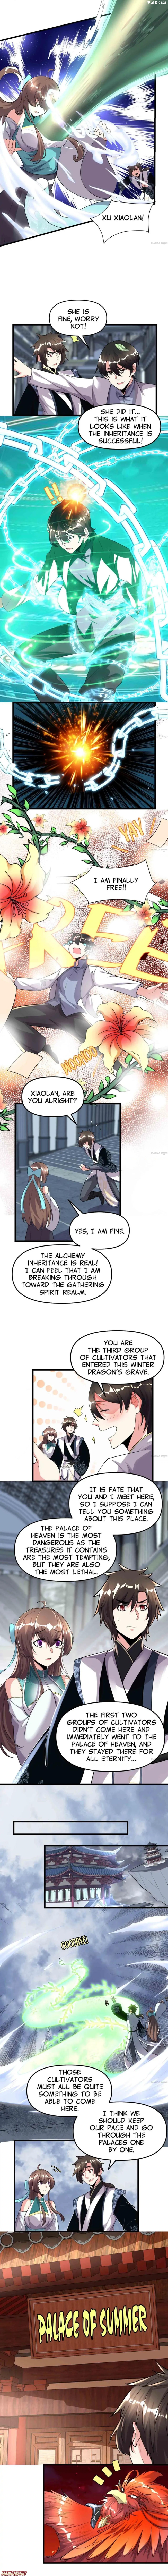 Cultivation, Kidding Me?! - Page 2